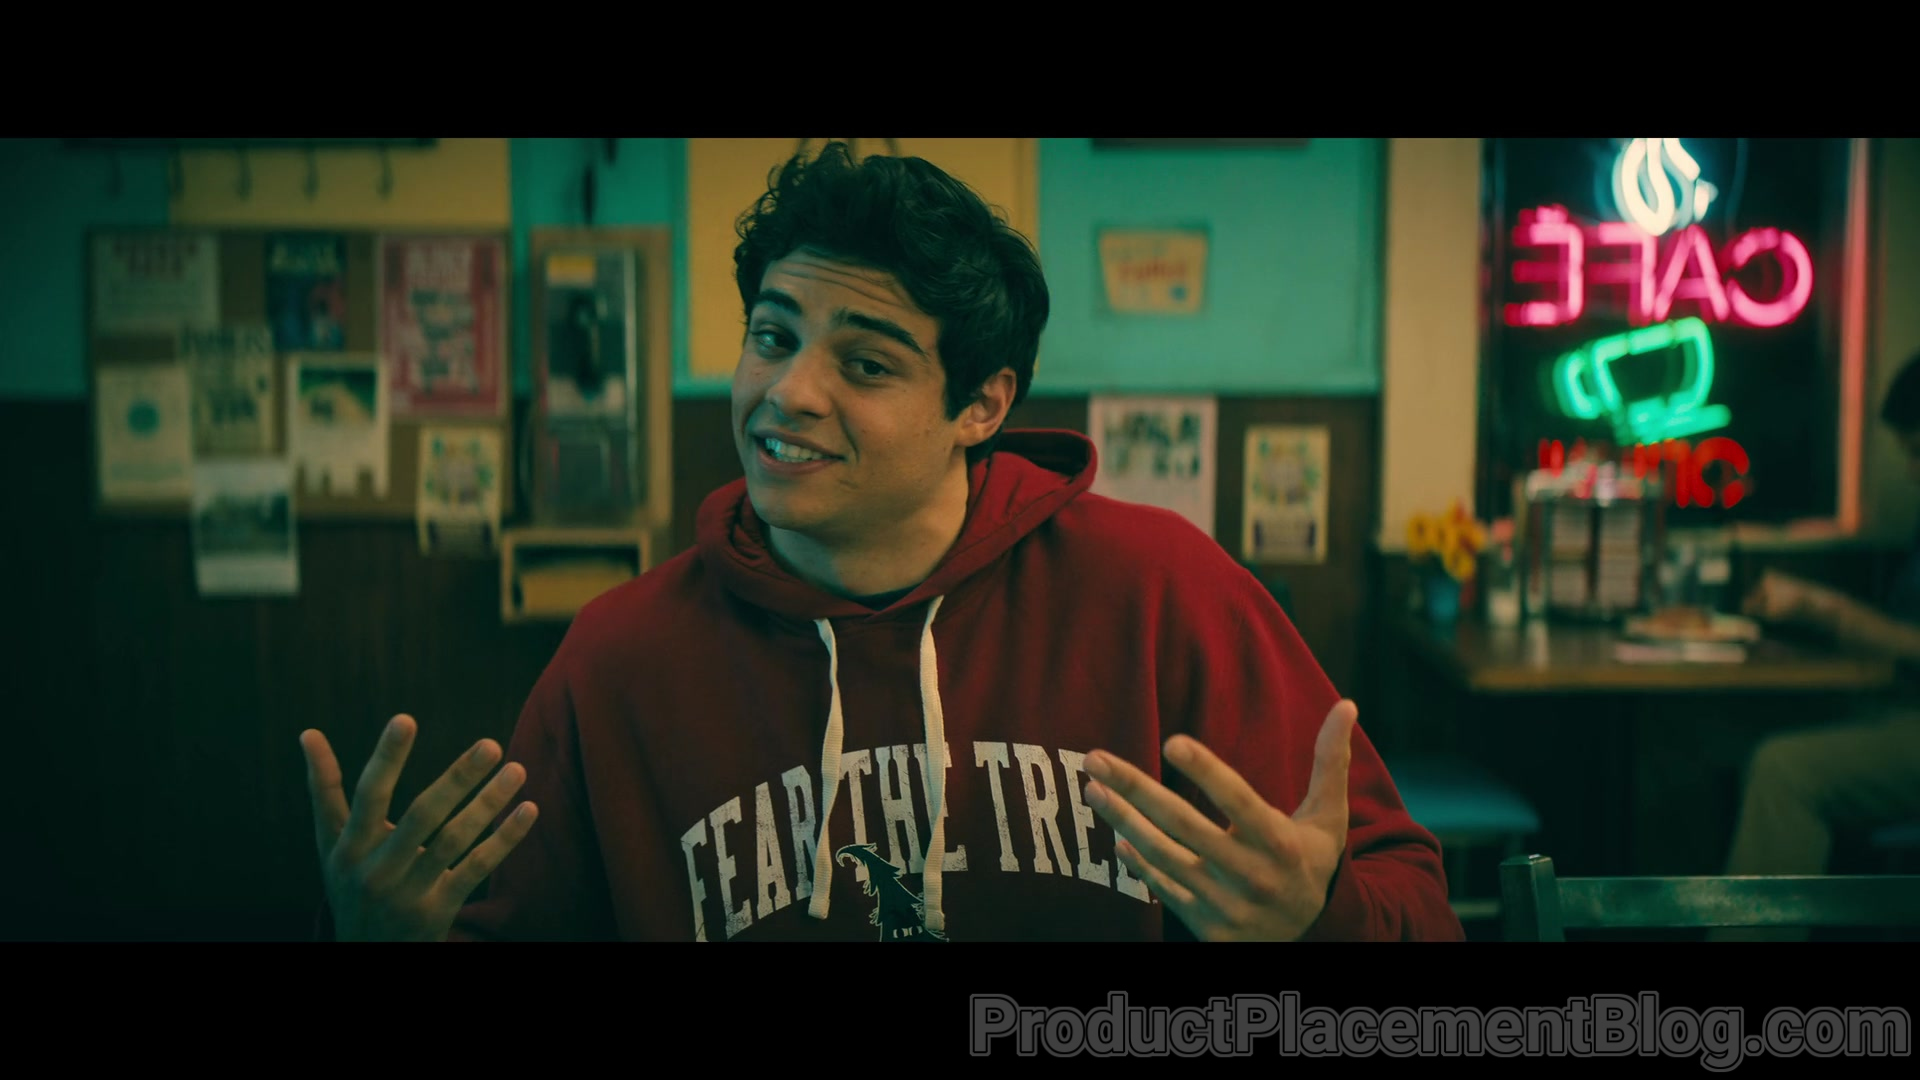 Stanford Fear The Tree Hoodie Of Noah Centineo As Peter ...